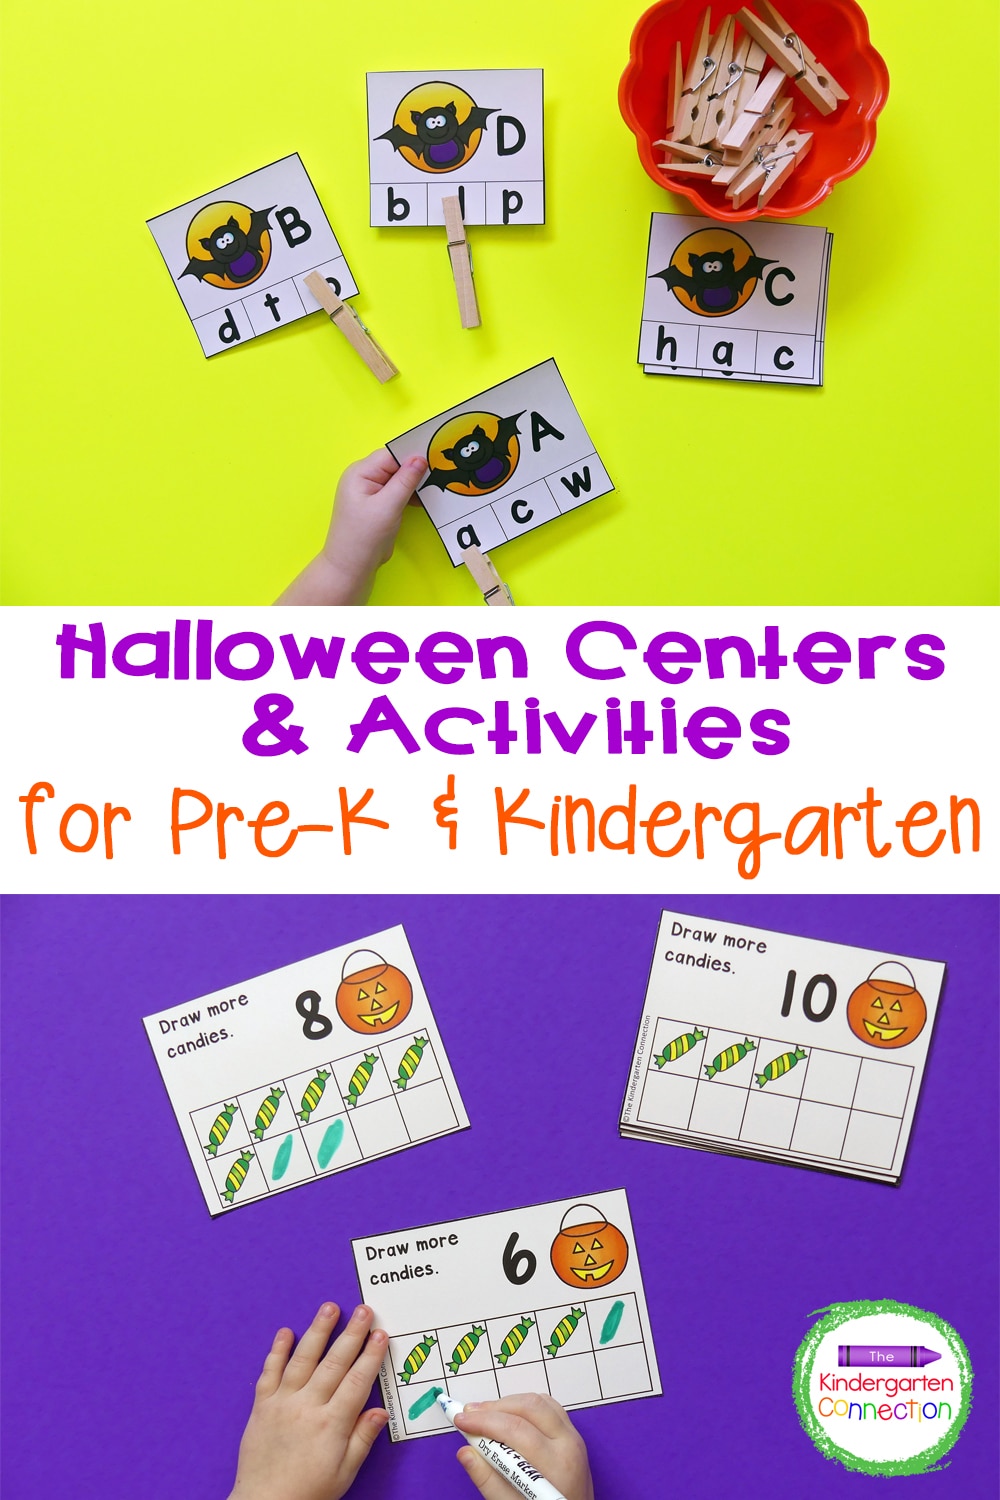 These Halloween Centers and Activities for Pre-K & Kindergarten are a great way to work on letters, sight words, counting, addition, and more!